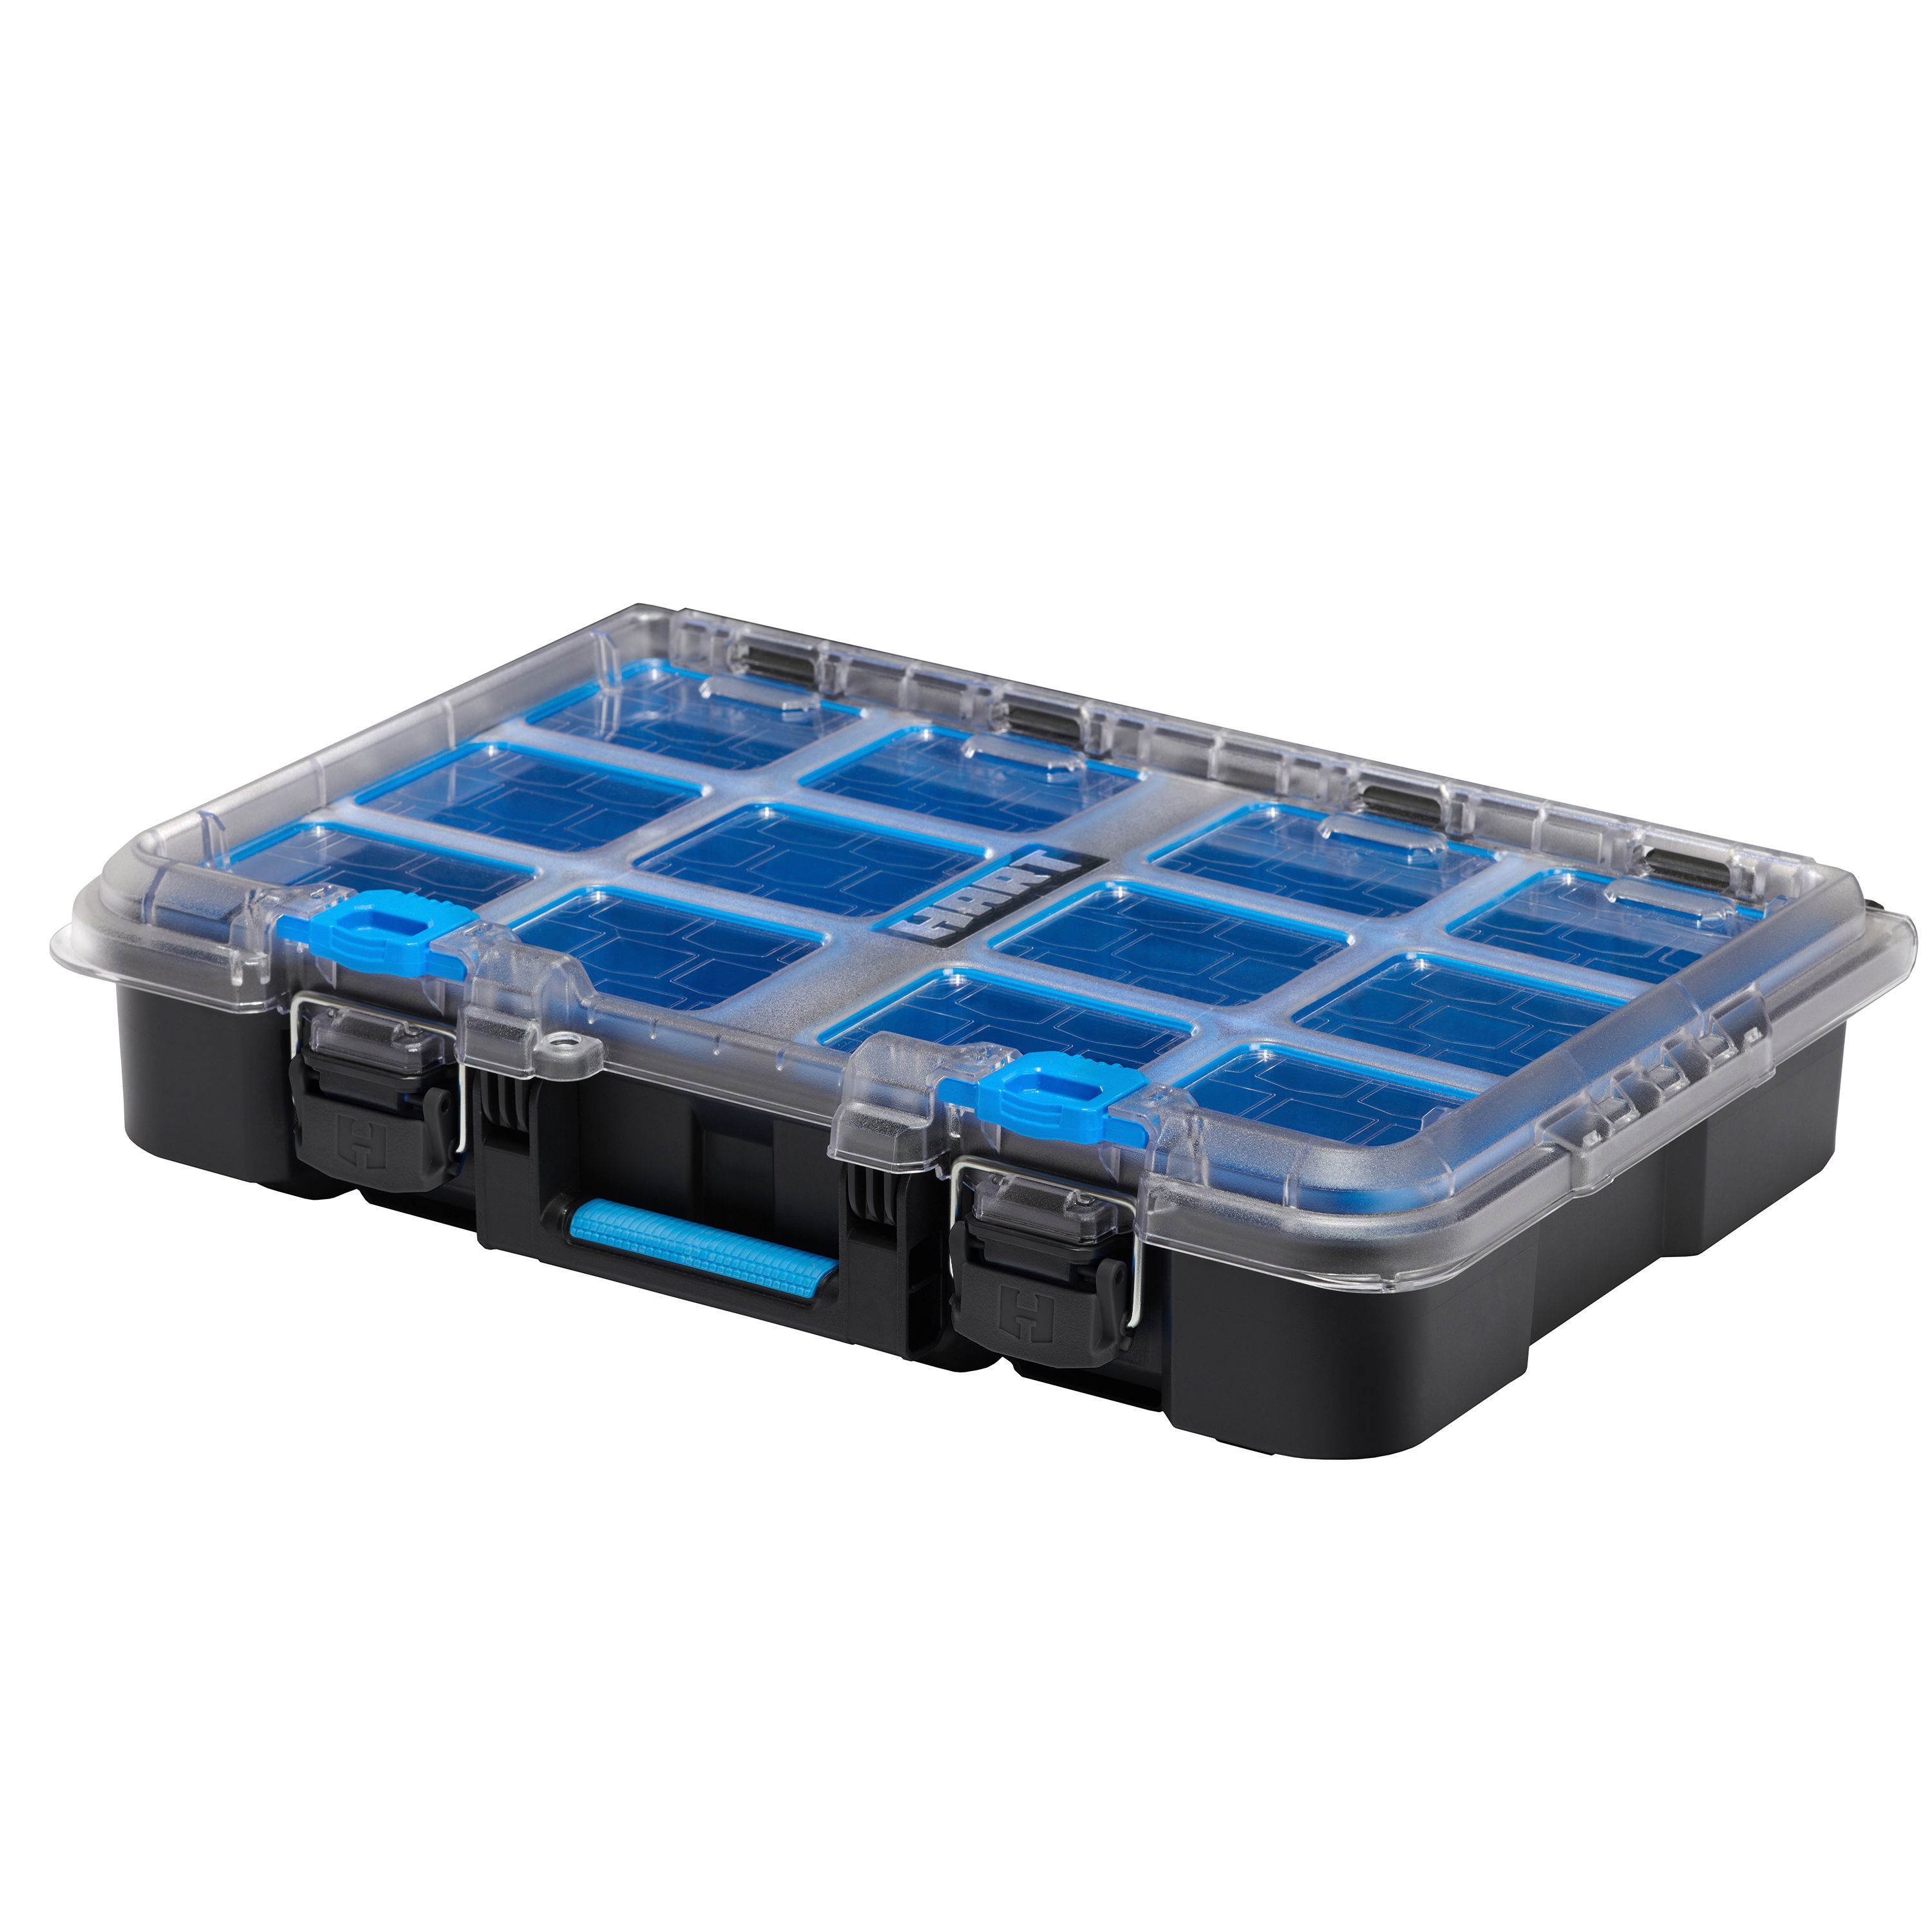 HART STACK System Small Parts Organizer with Removable Bins, Fits Modular Storage System | Walmart (US)